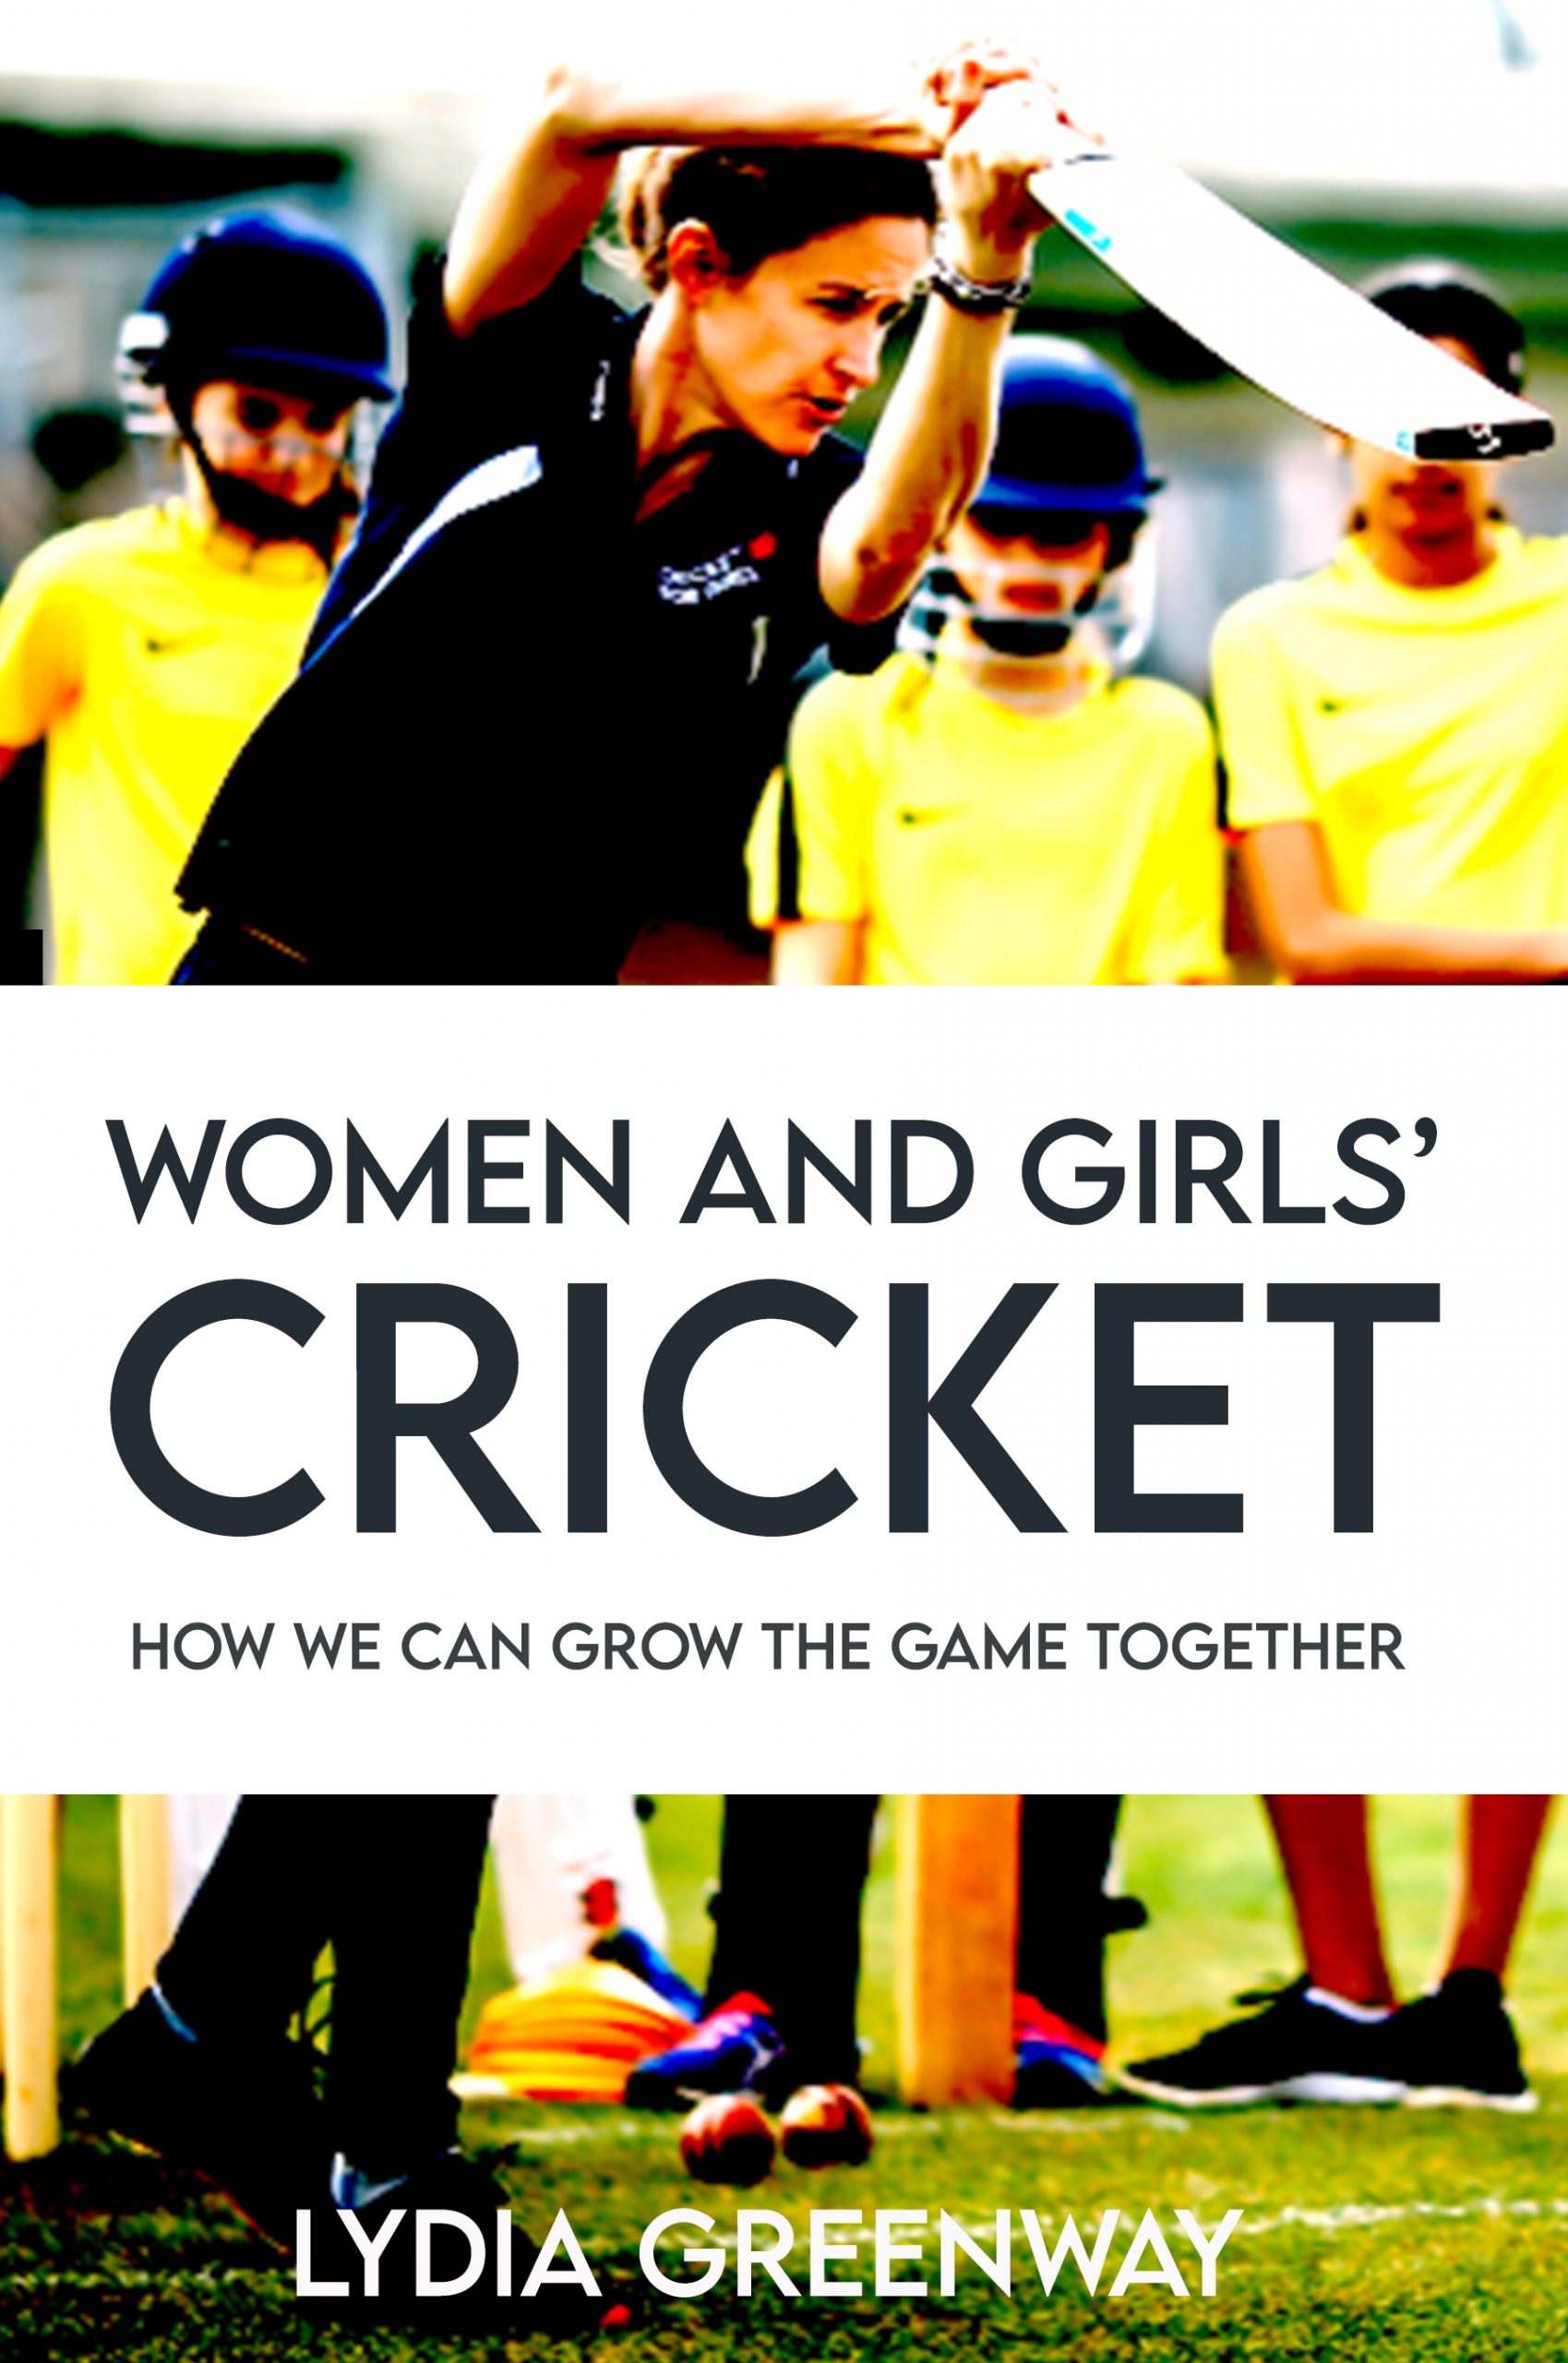 Women and Girls’ Cricket: How We Can Grow the Game Together